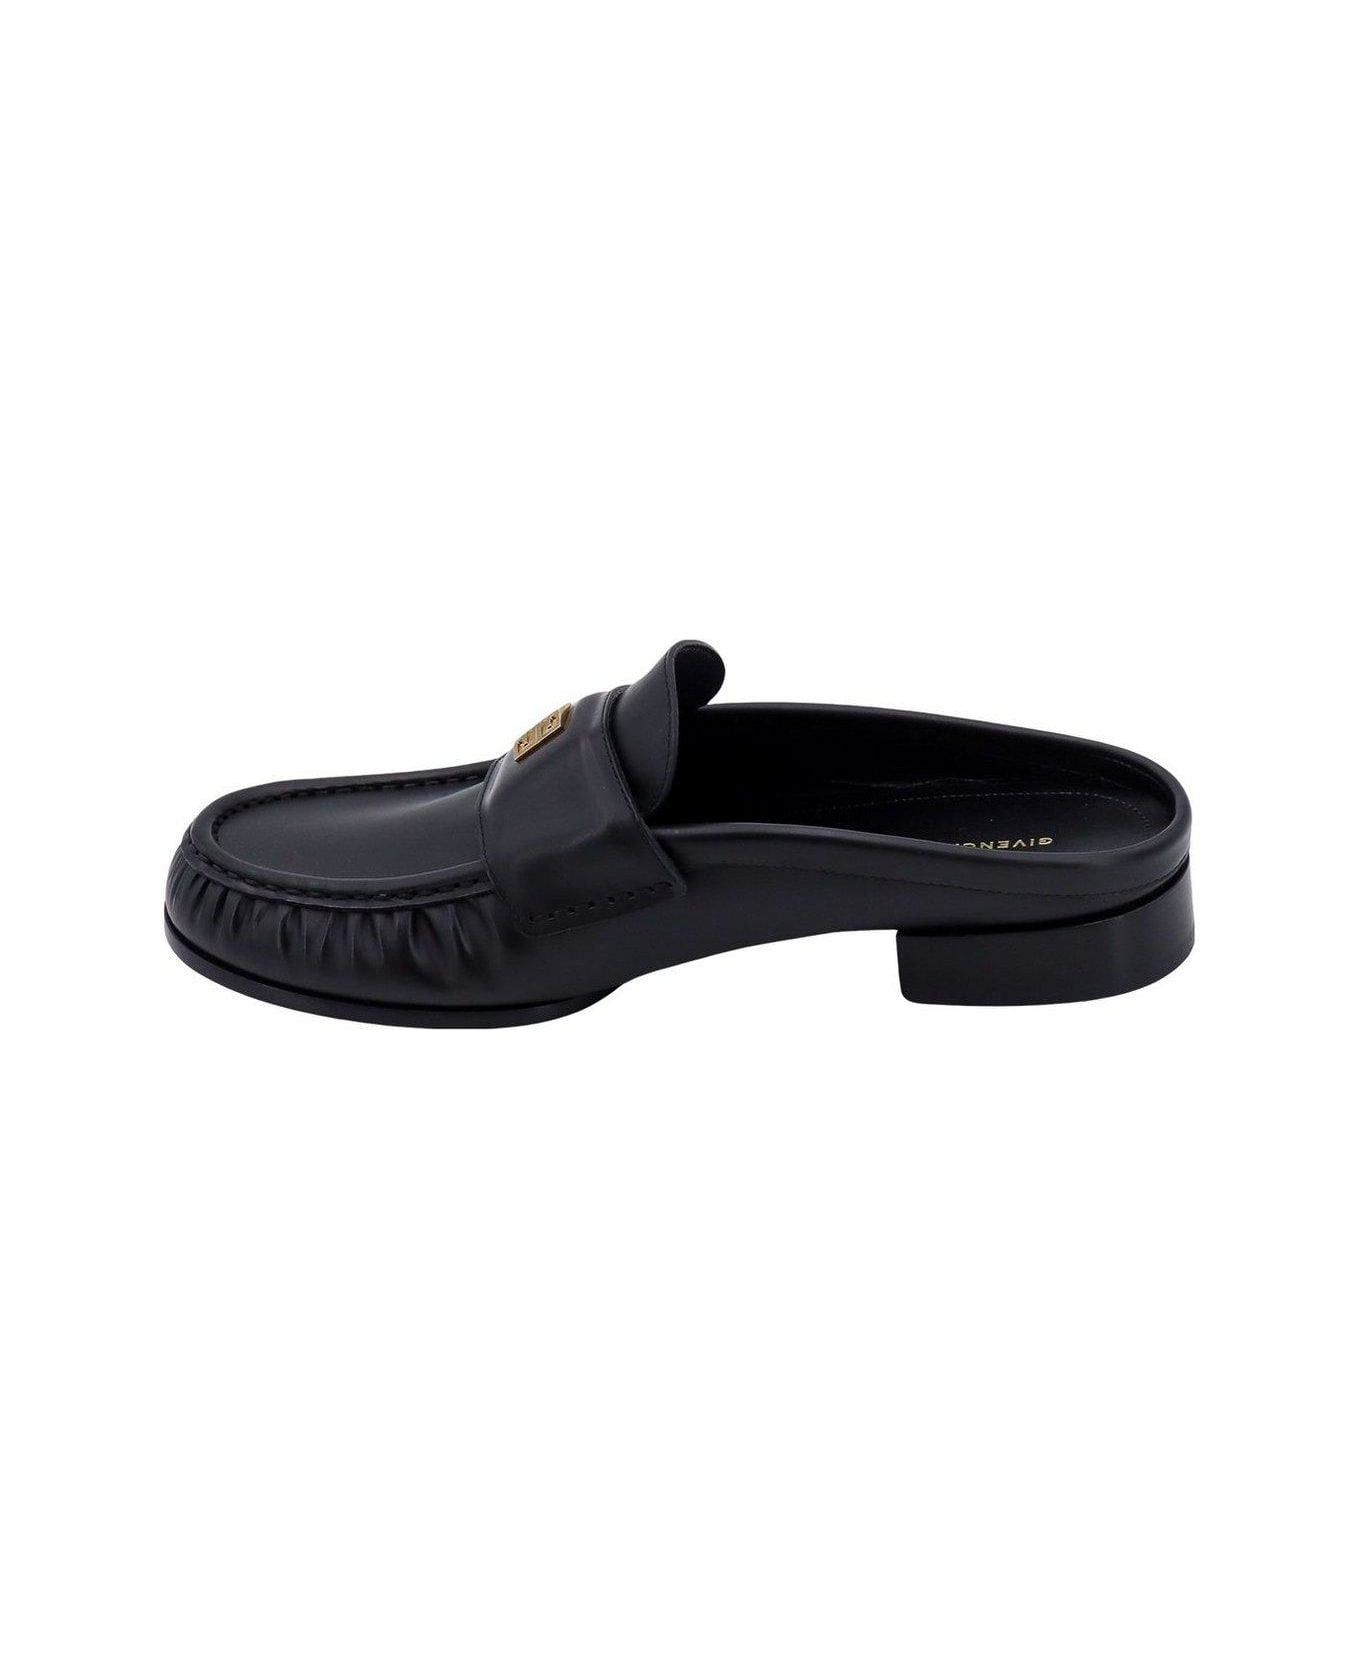 Givenchy Plaque Mules - Black